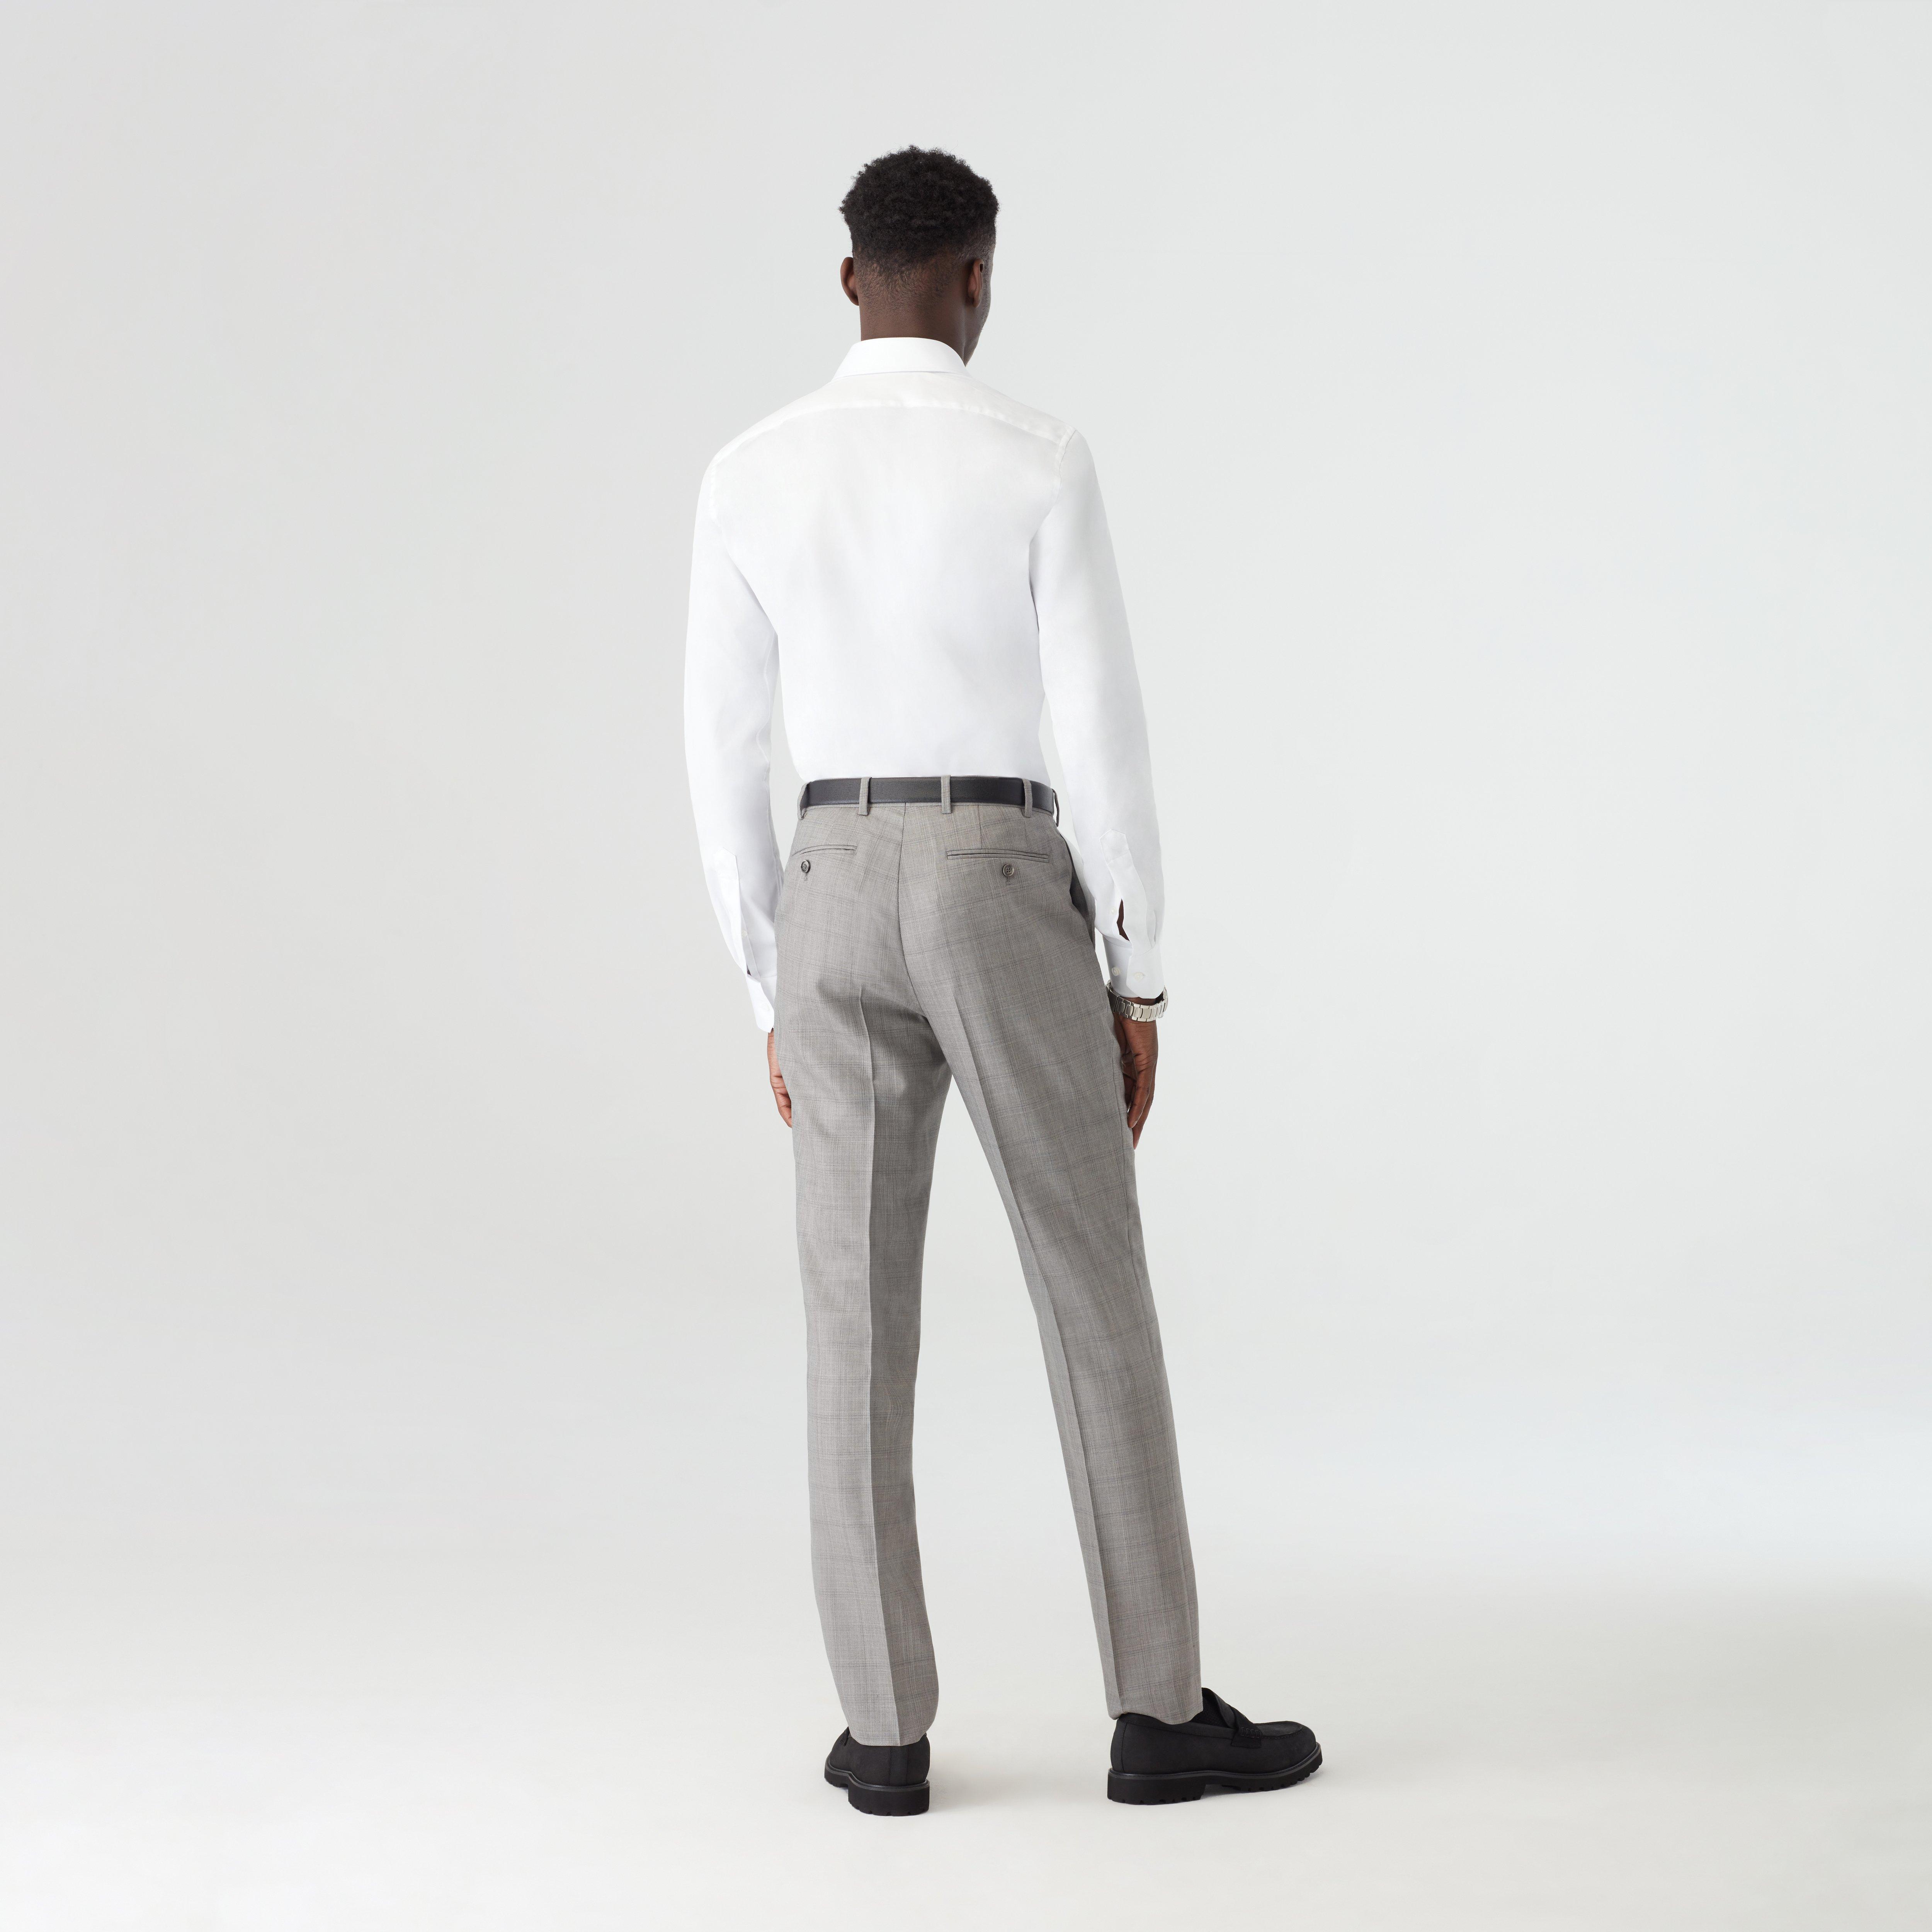 Custom Suits Made For You - Kelbrook Check Light Gray Suit | INDOCHINO